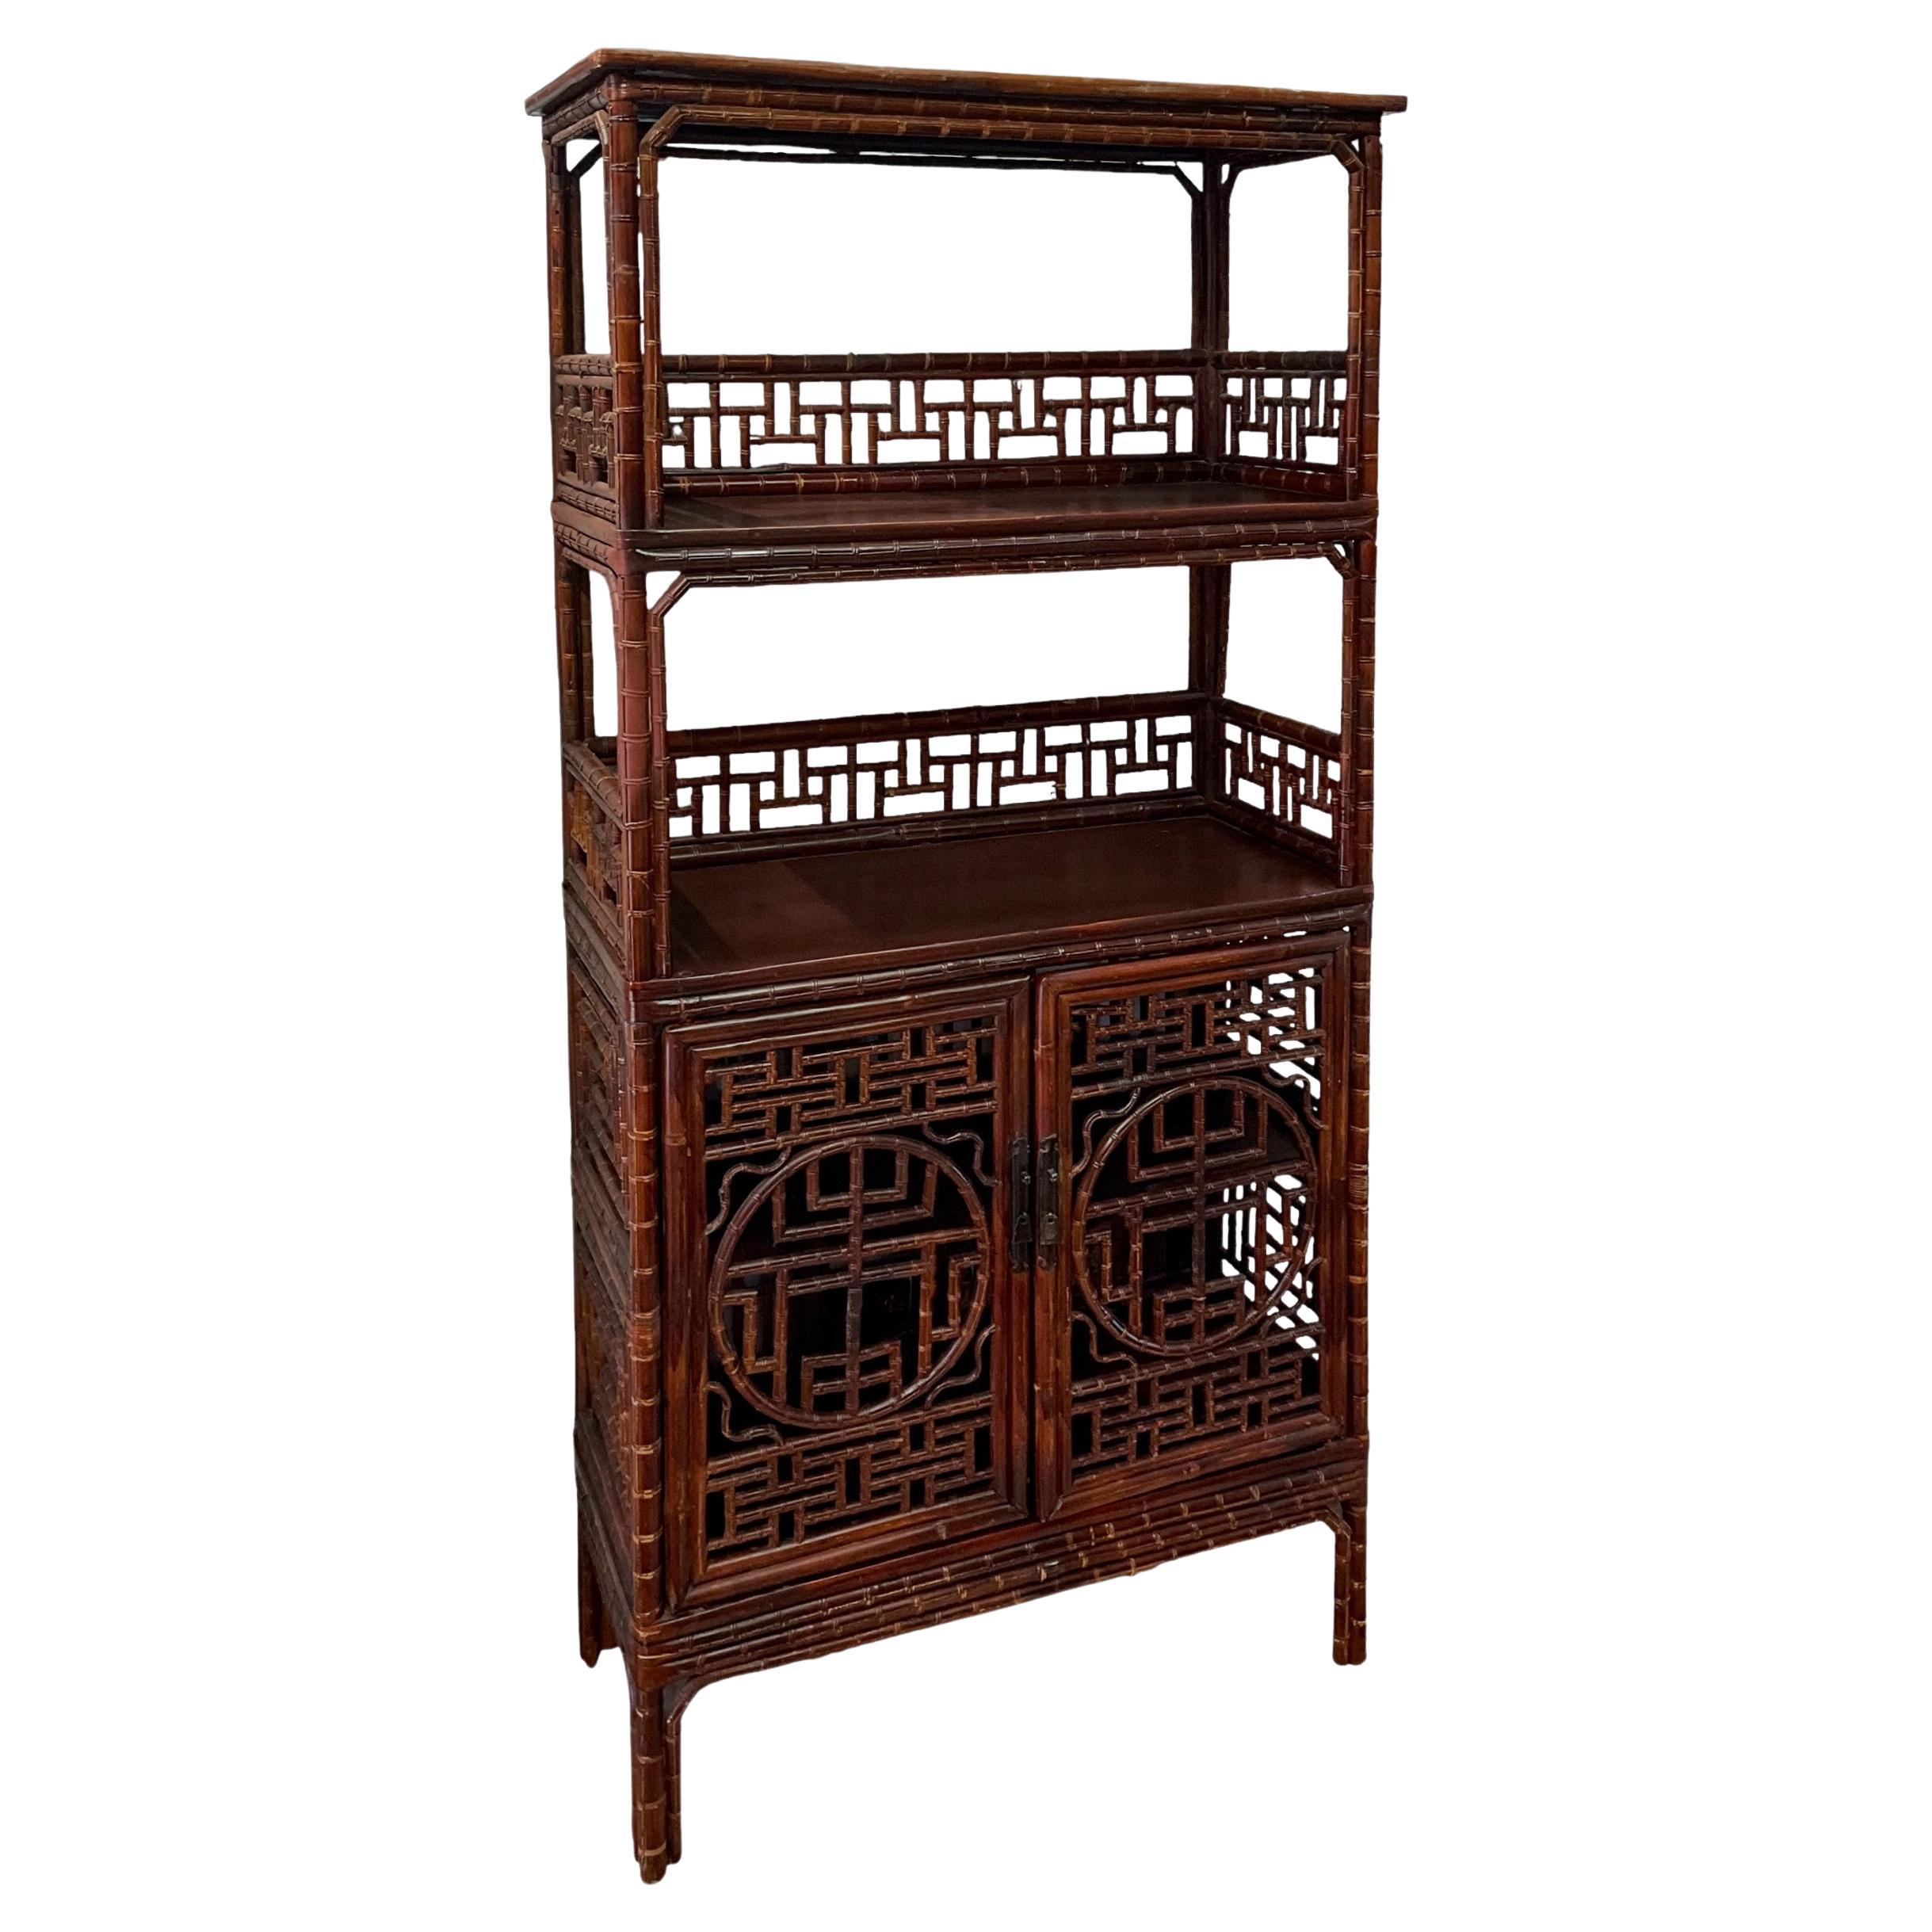 Early 20th-C. Chinese Bamboo Cabinet / Etagere / Bookcase With Ornate Fretwork 